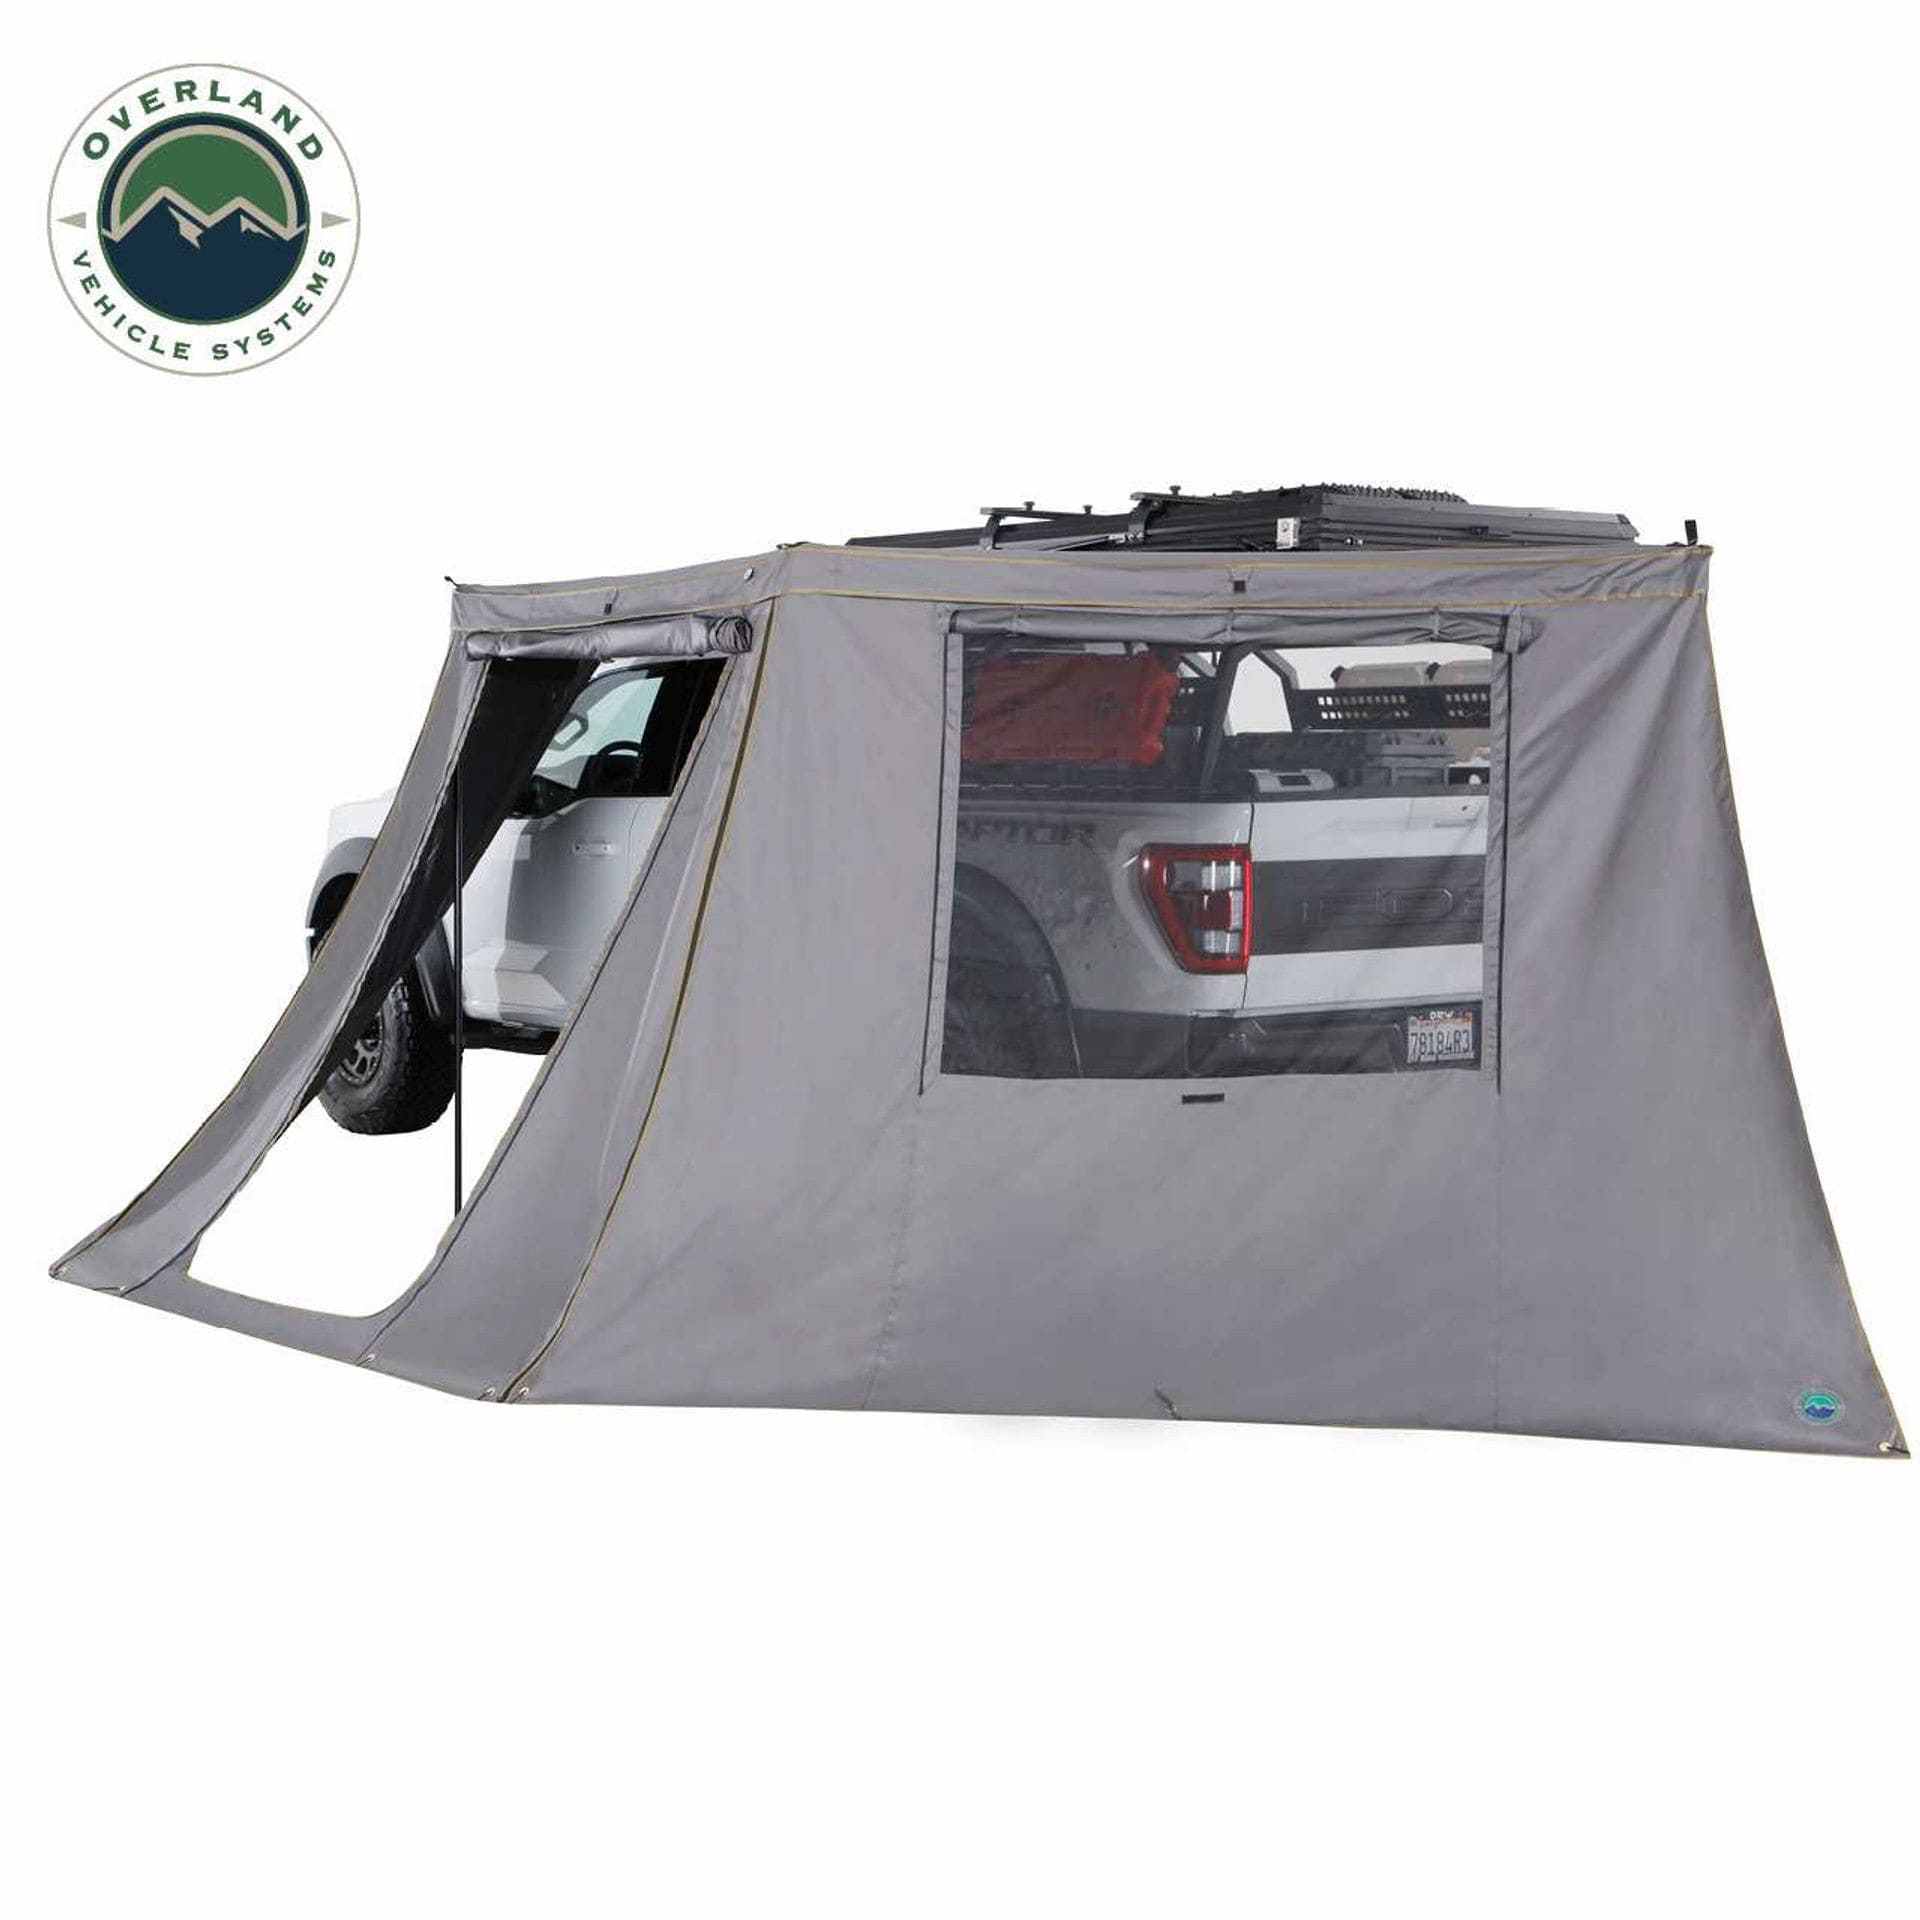 HD Nomadic 180 - LTE Awning Wall With Windows Awning Overland Vehicle Systems   